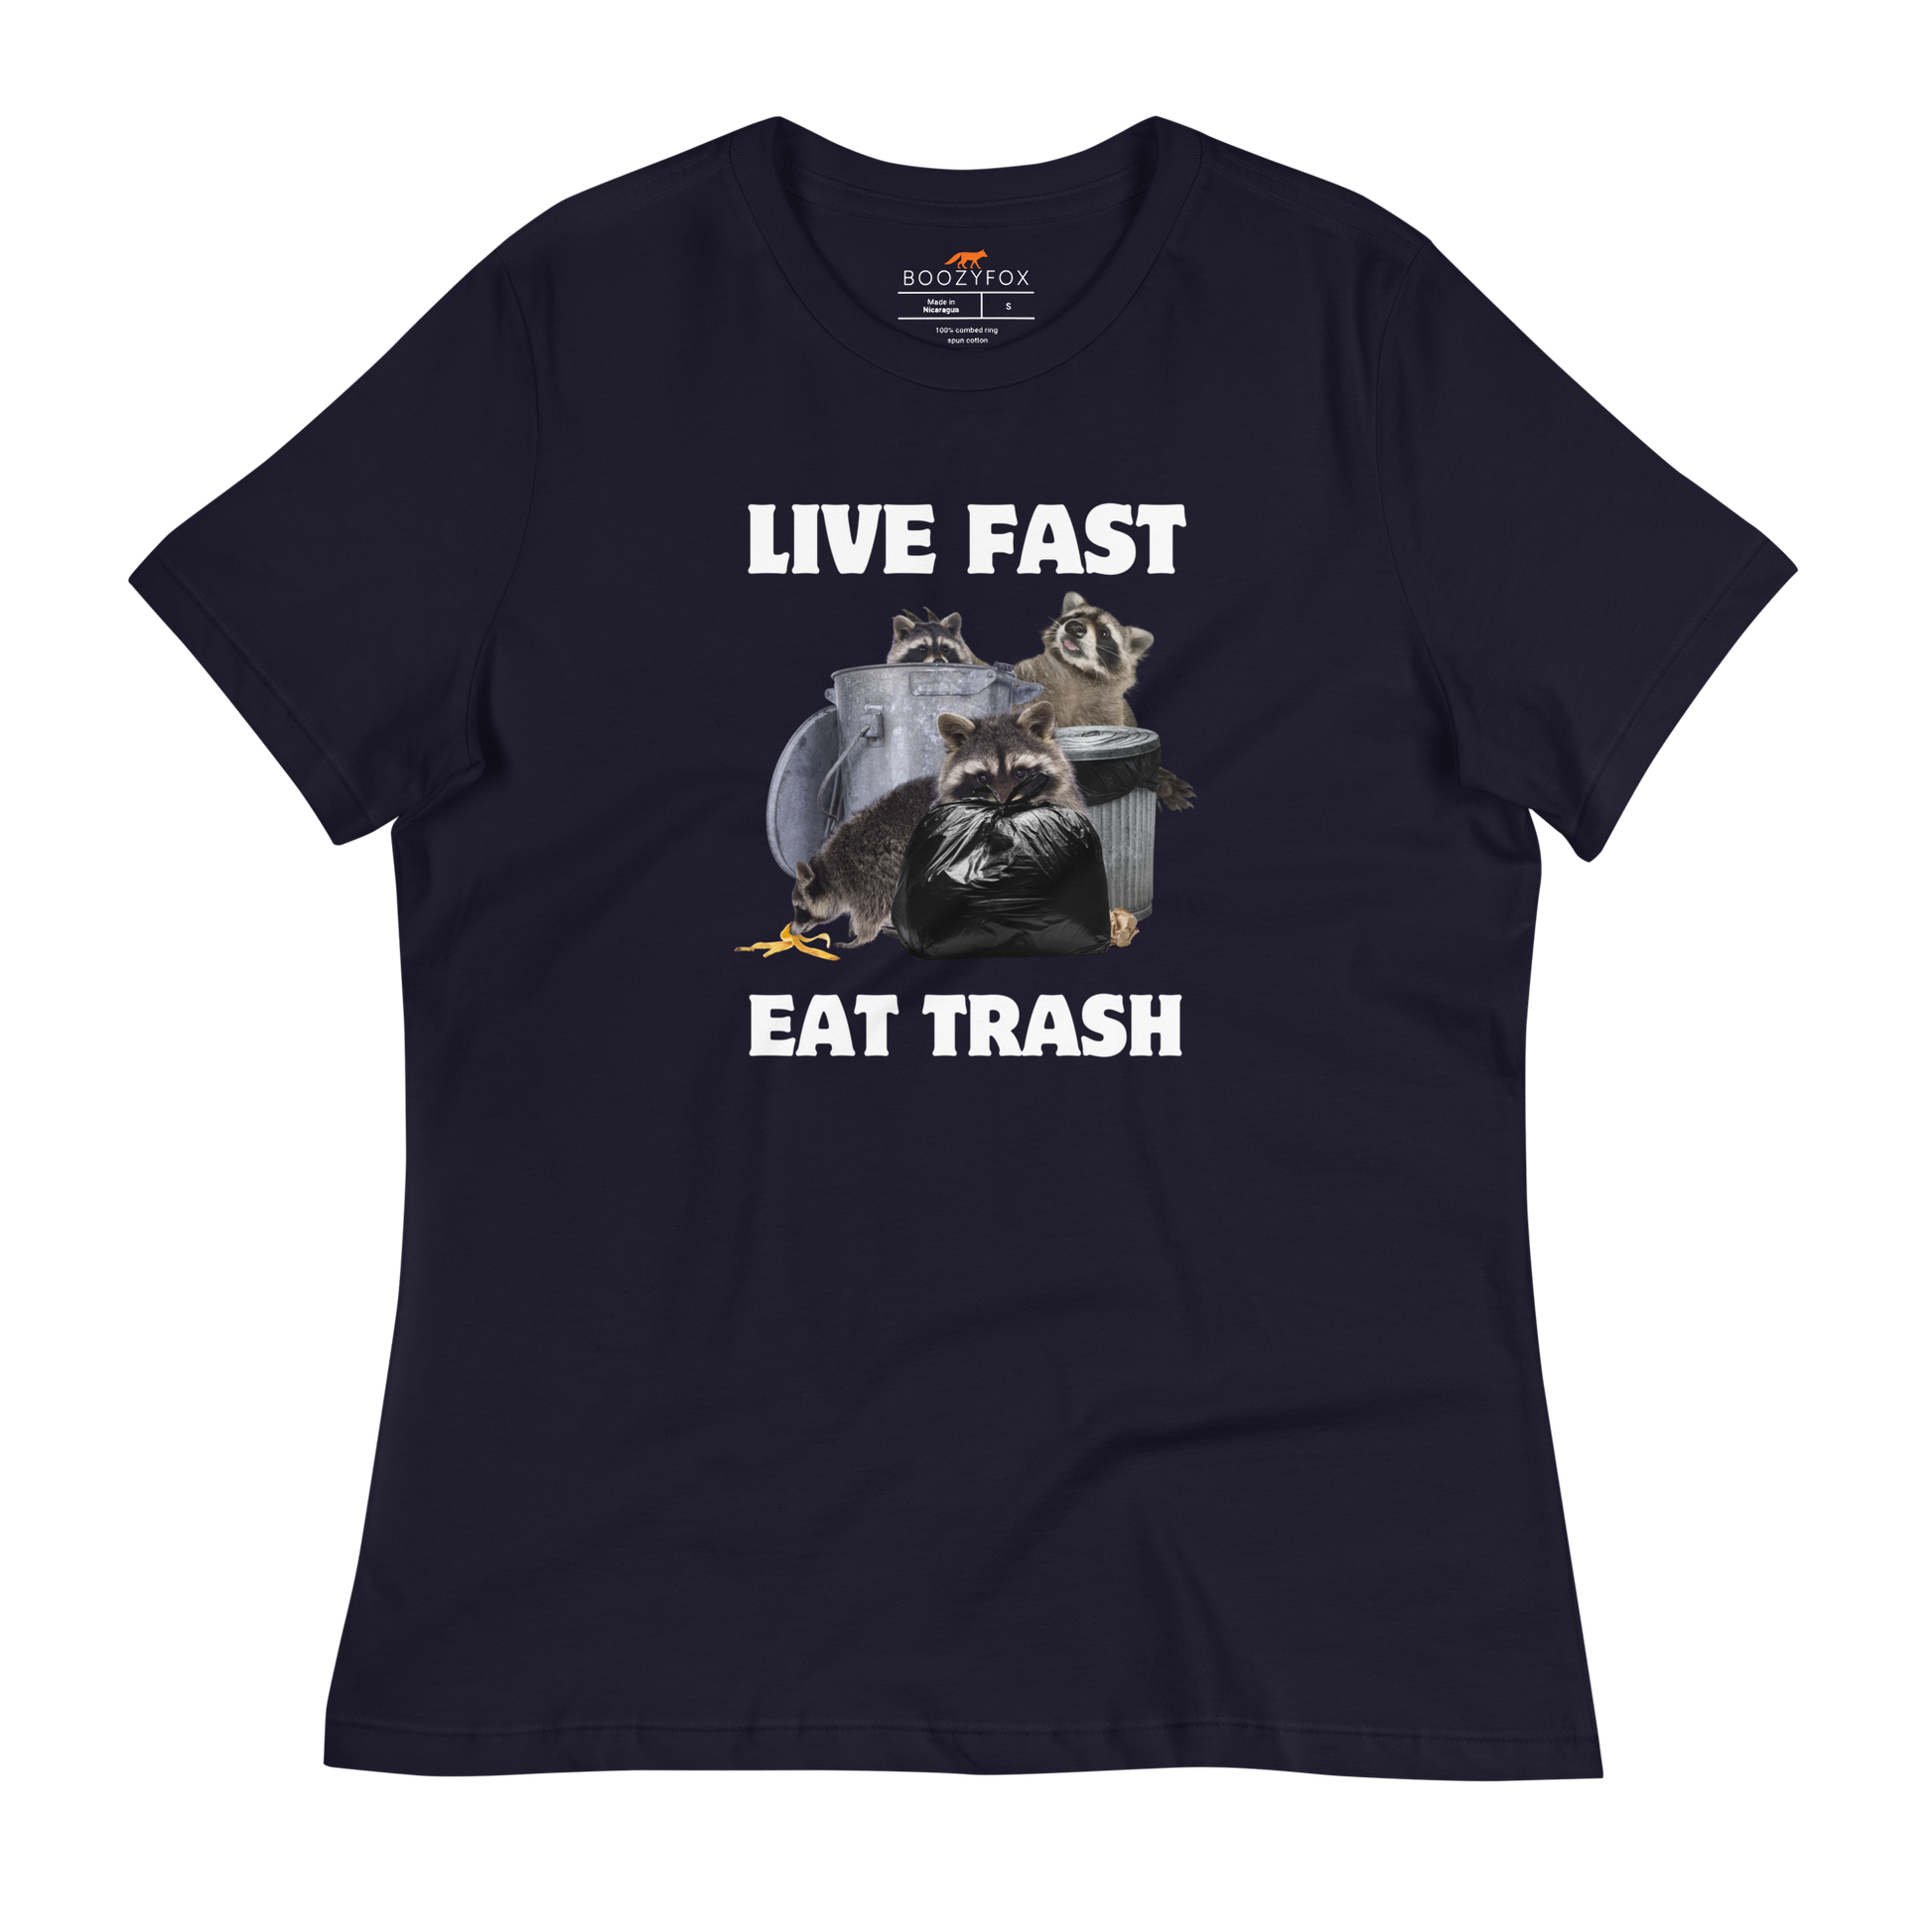 Women's Navy Raccoon T-Shirt featuring a hilarious Live Fast Eat Trash graphic on the chest - Women's Funny Graphic Raccoon Tees - Boozy Fox